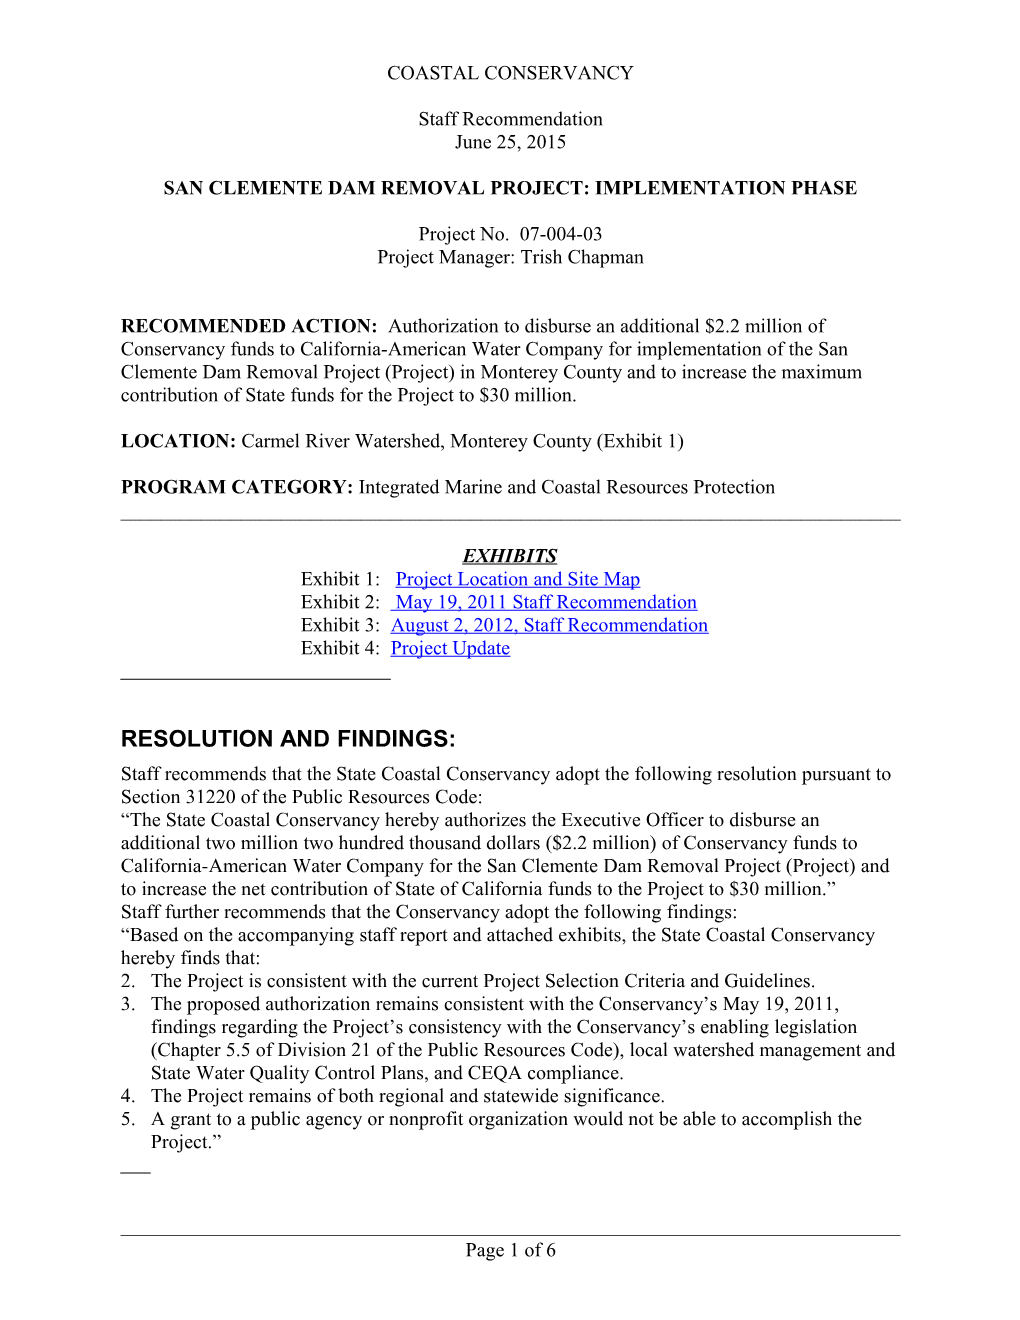 San Clemente Dam Removal Project: Implementation Phase